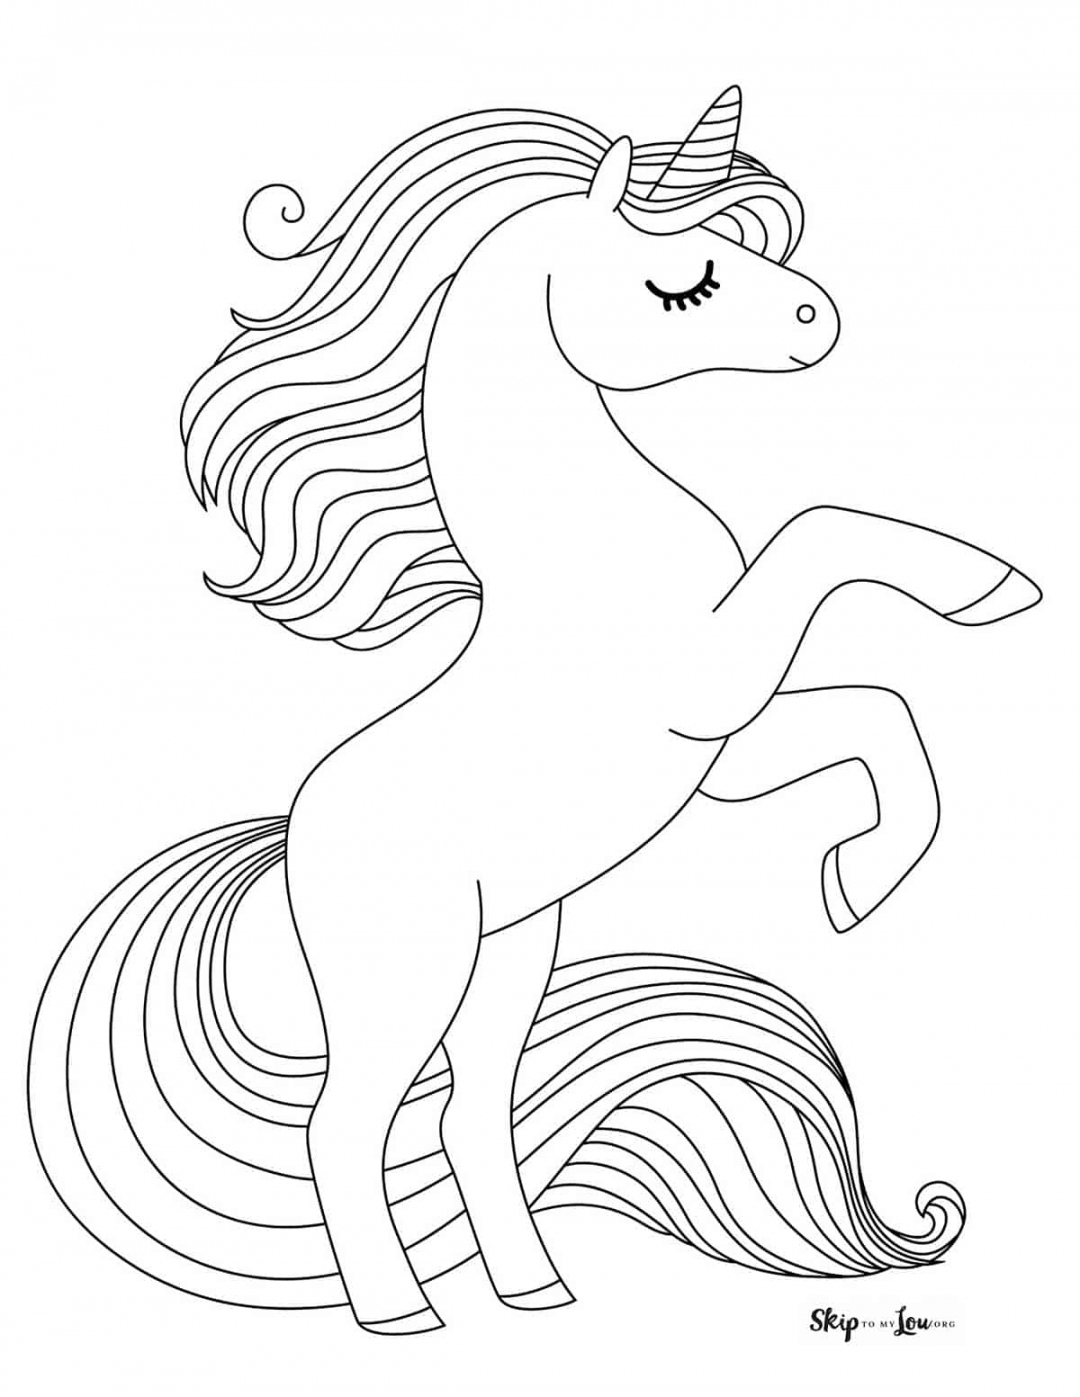 Unicorn Coloring Pages Free Printable - Printable -  Magical Unicorn Coloring Pages Print for Free  Skip To My Lou